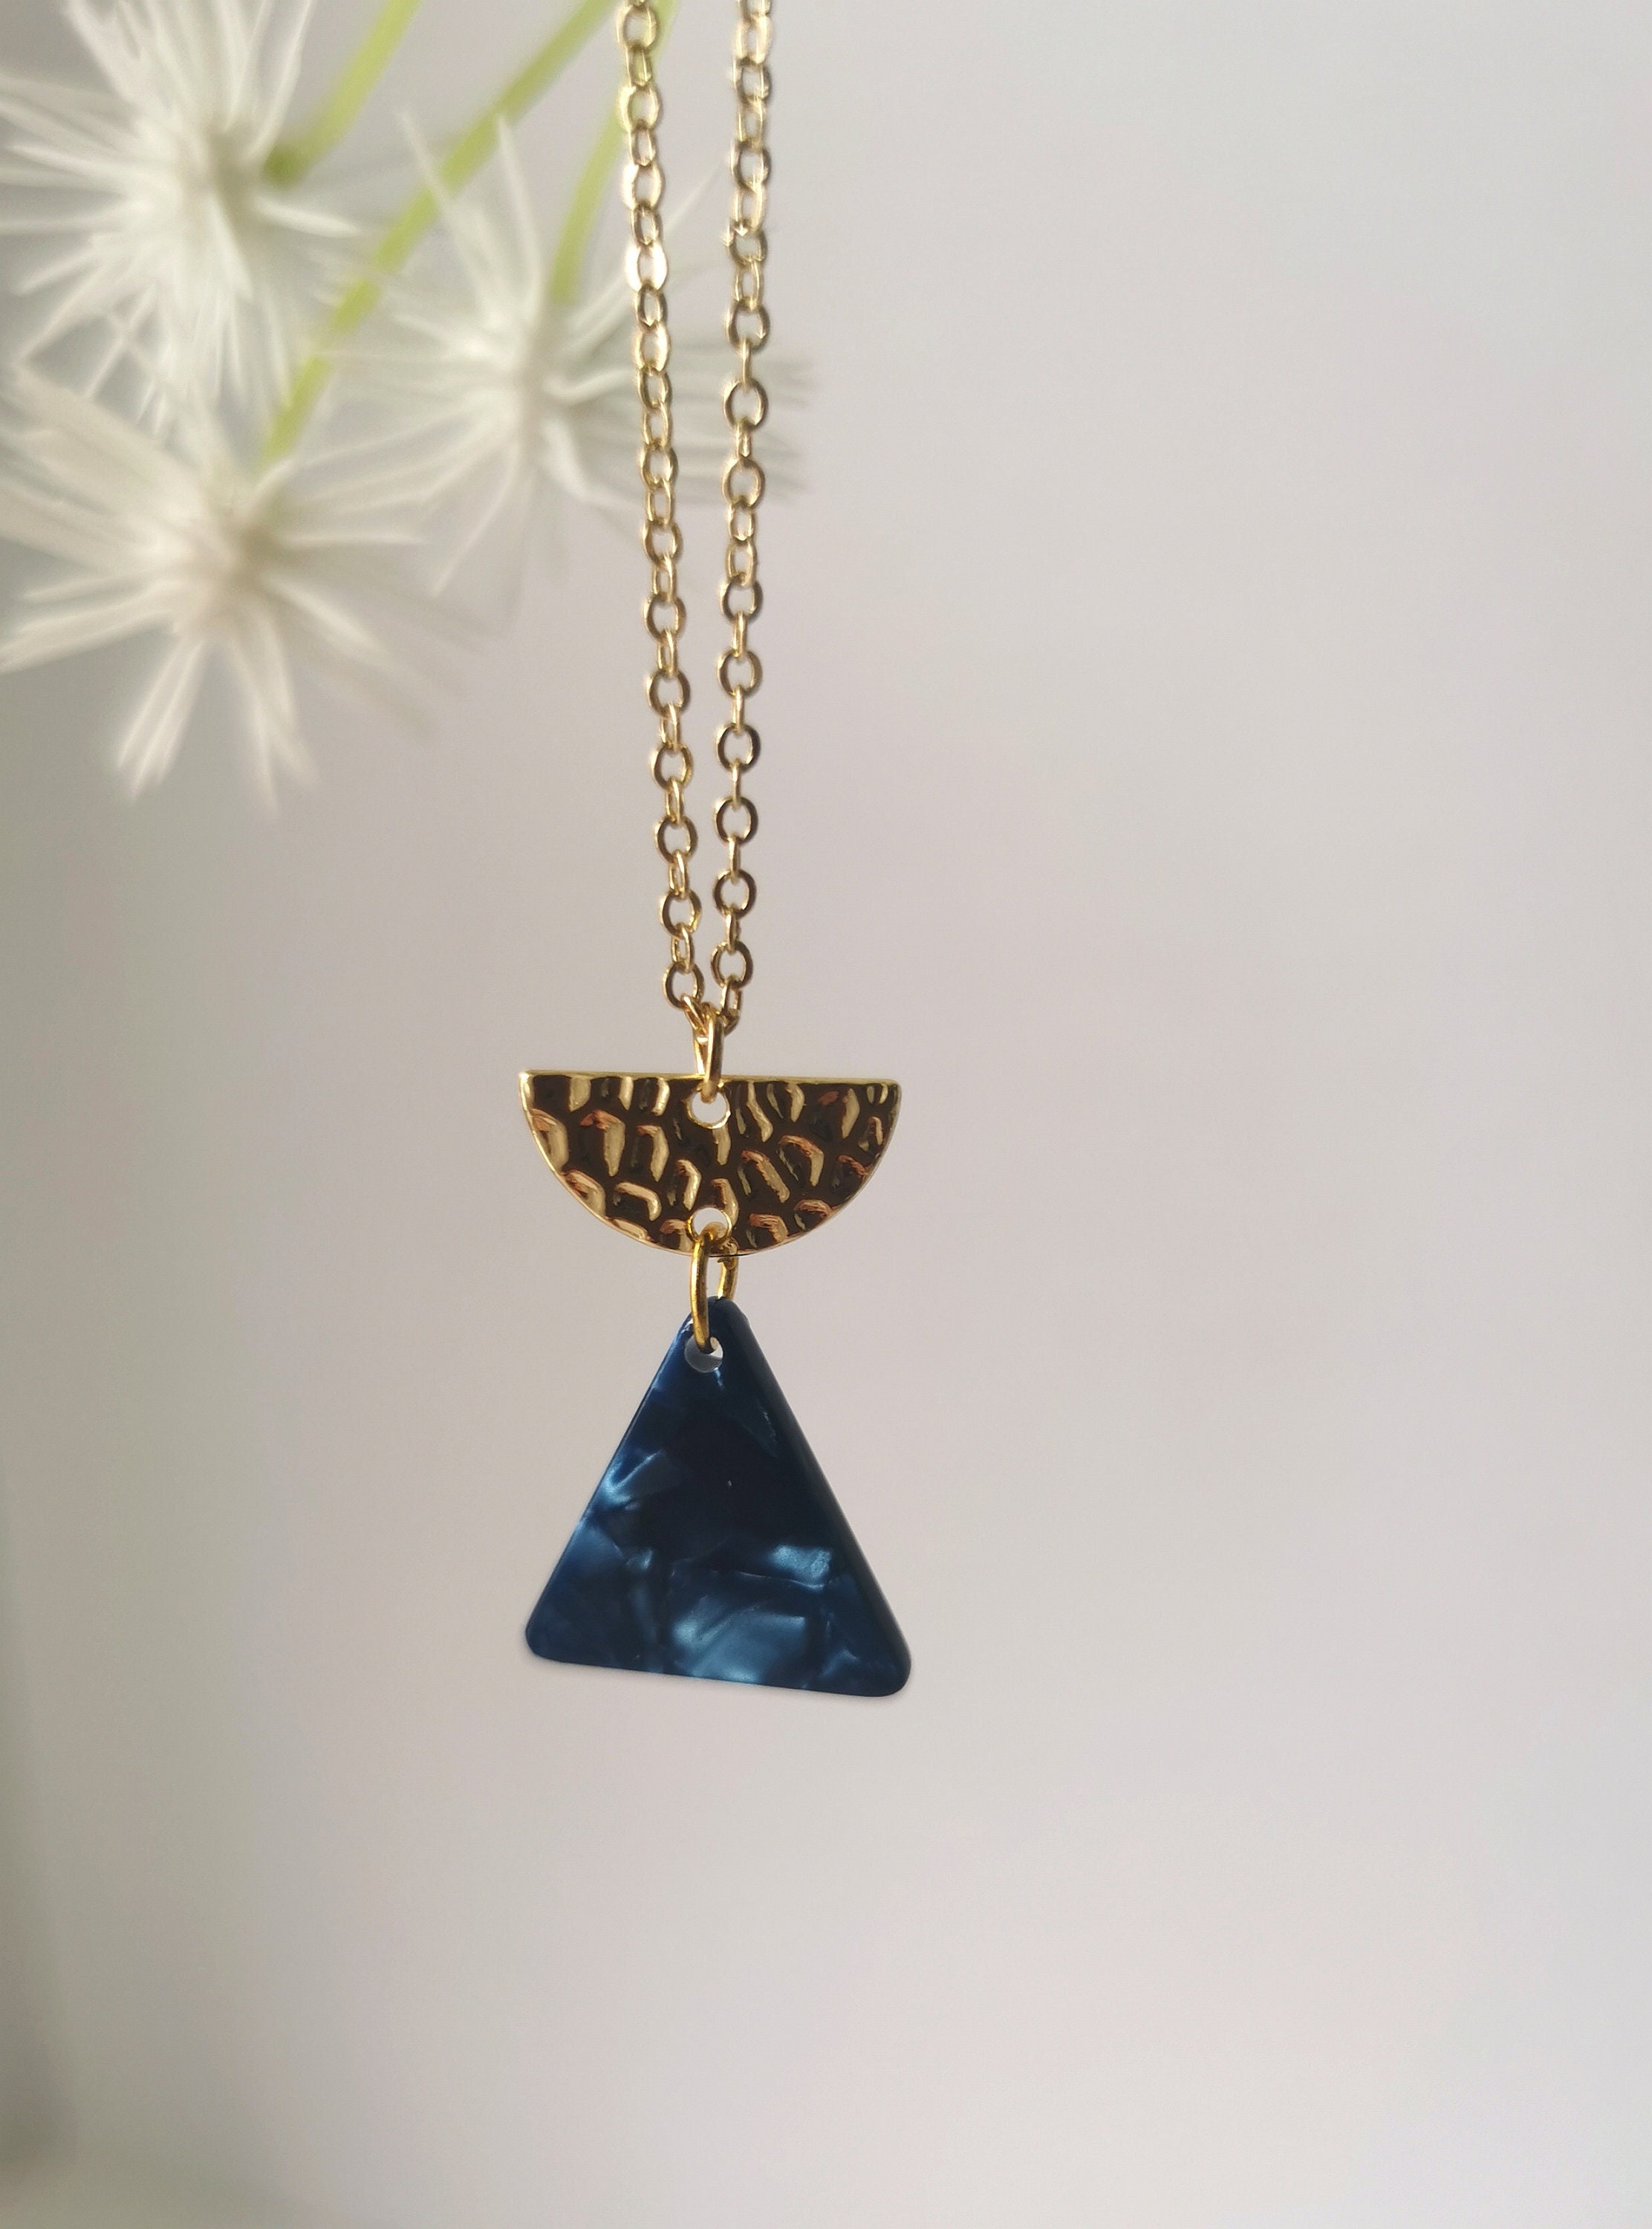 Geometric Art Deco Inspired Necklace With A Half Moon Textured Brass & Midnight Blue Tortoiseshell Triangle Charm Gold Plated Fine Chain